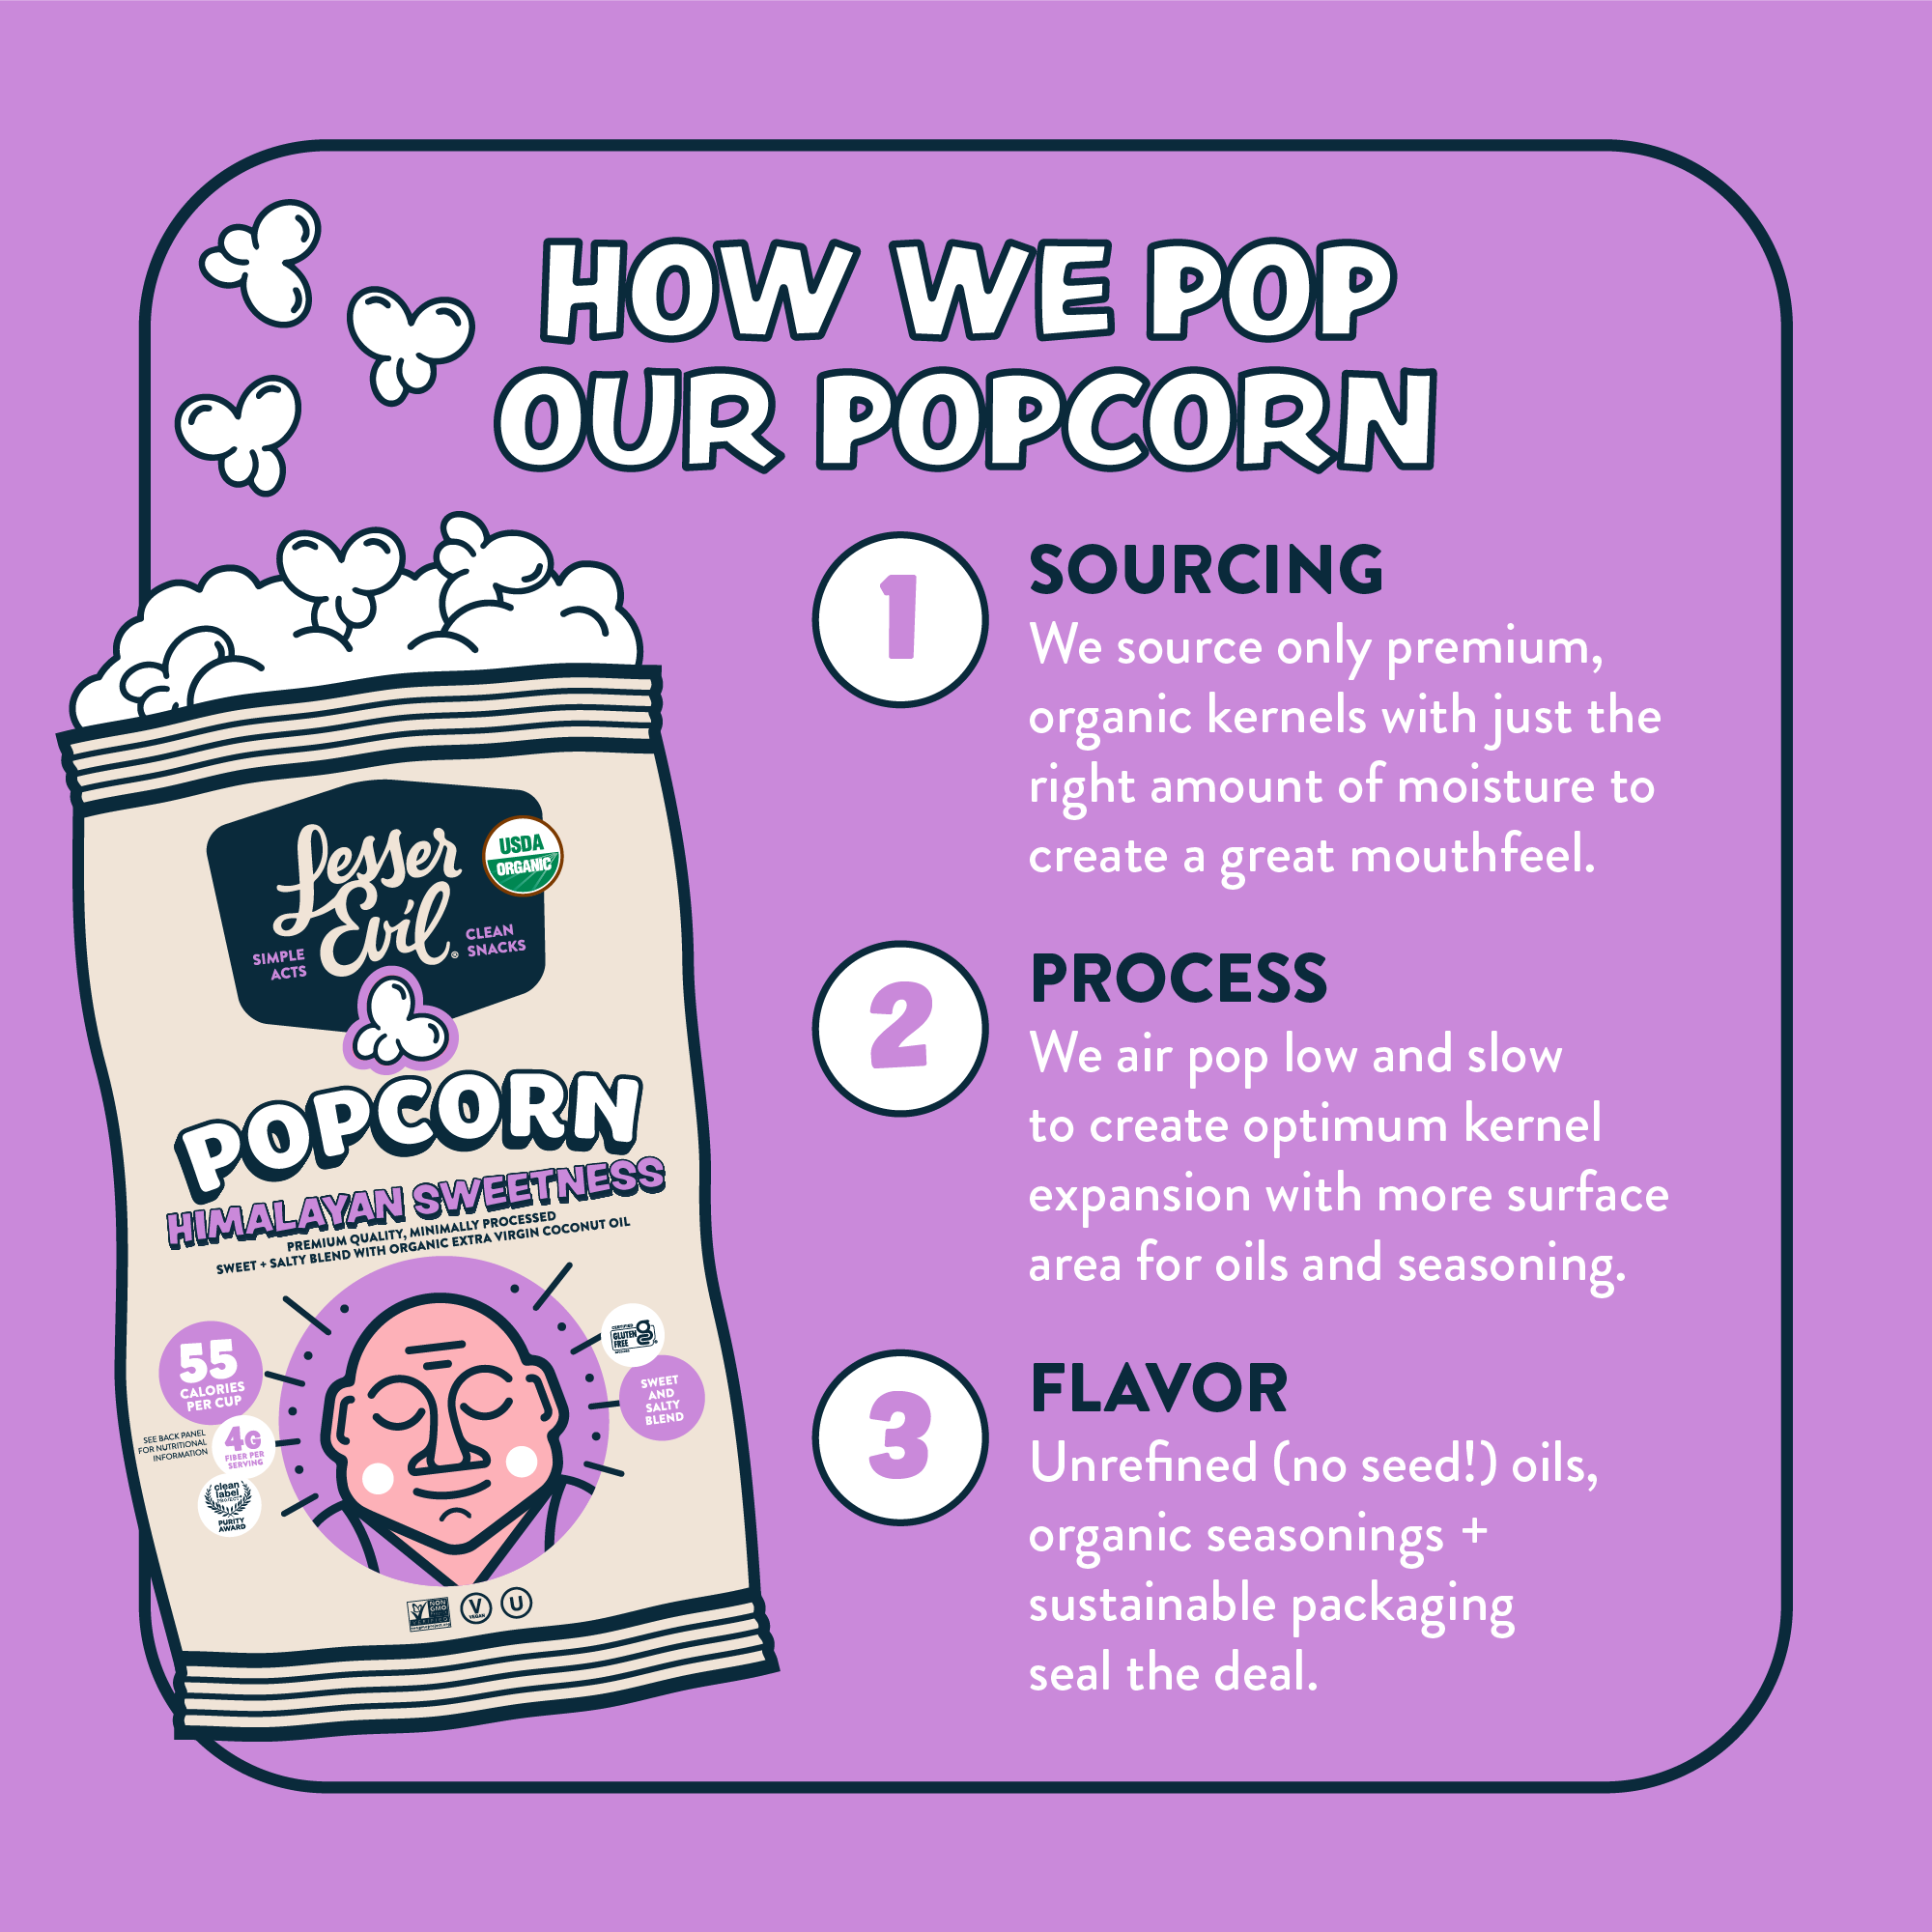 information about how we pop our himalayan sweetness gourmet popcorn